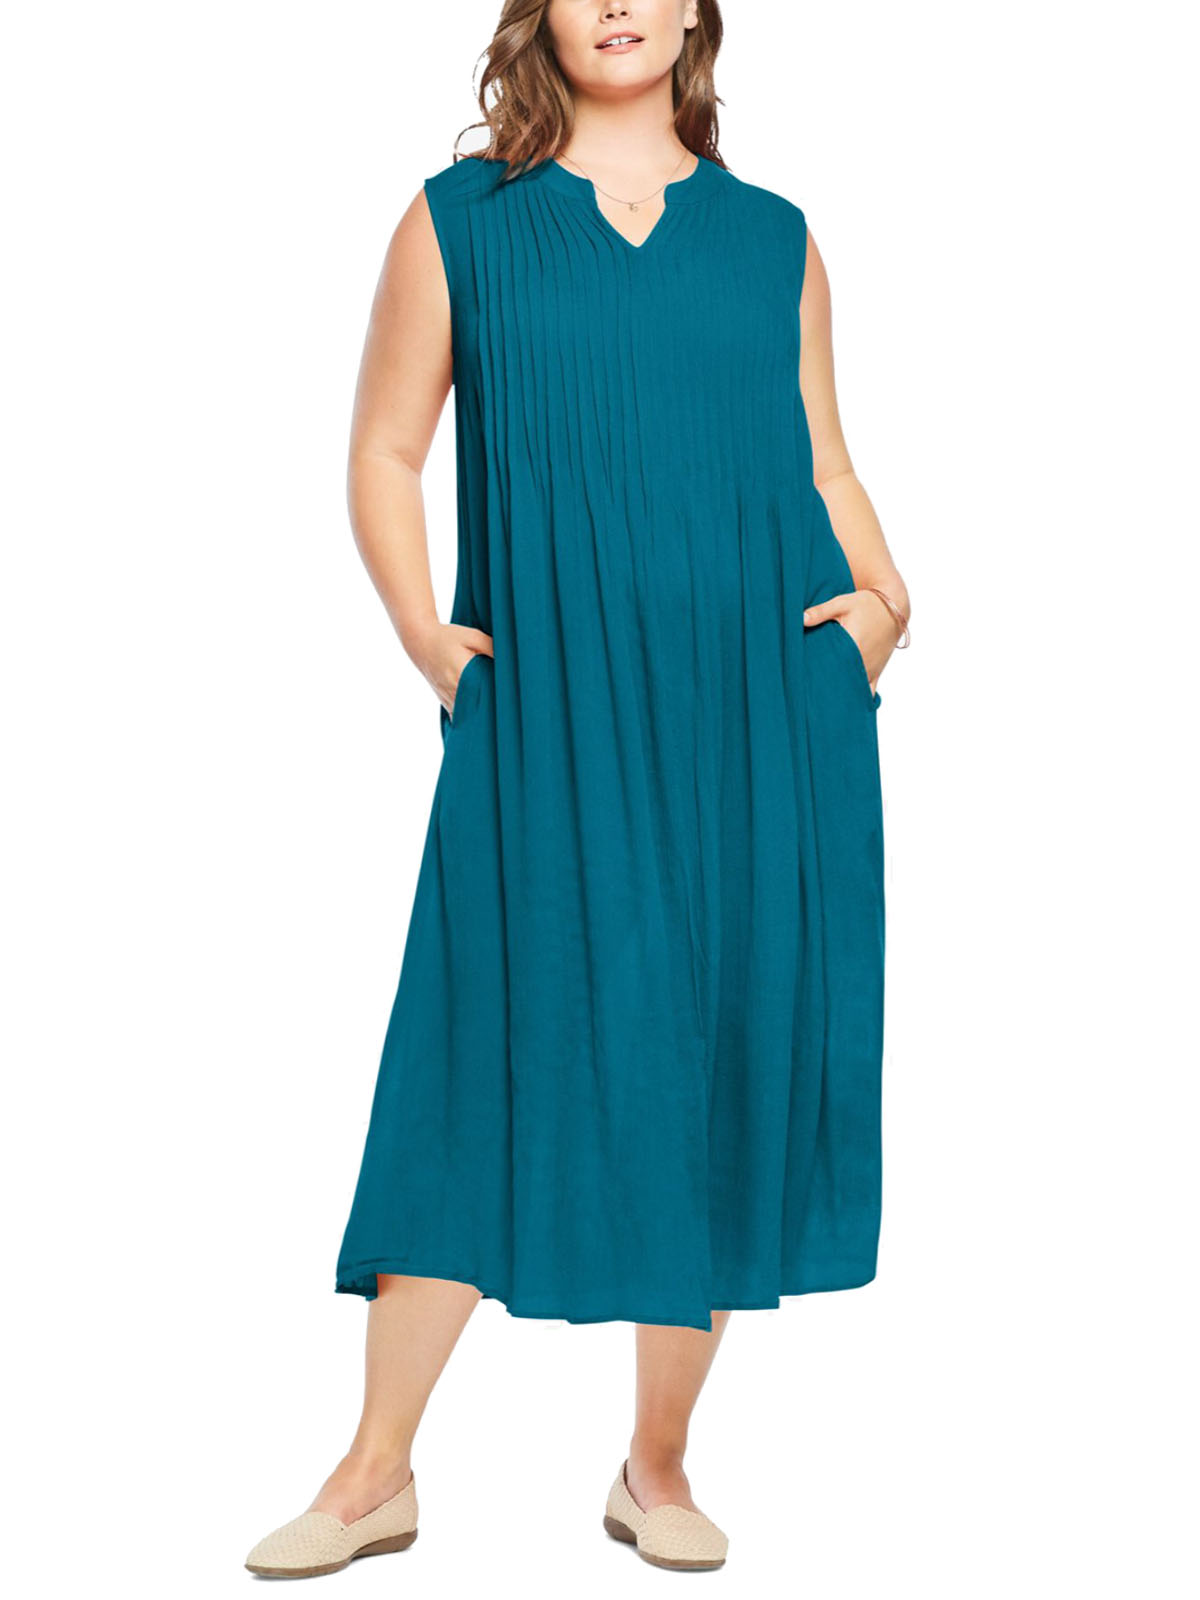 Woman Within - - TEAL Sleeveless Pintuck Crinkle Dress - Plus Size 30 ...